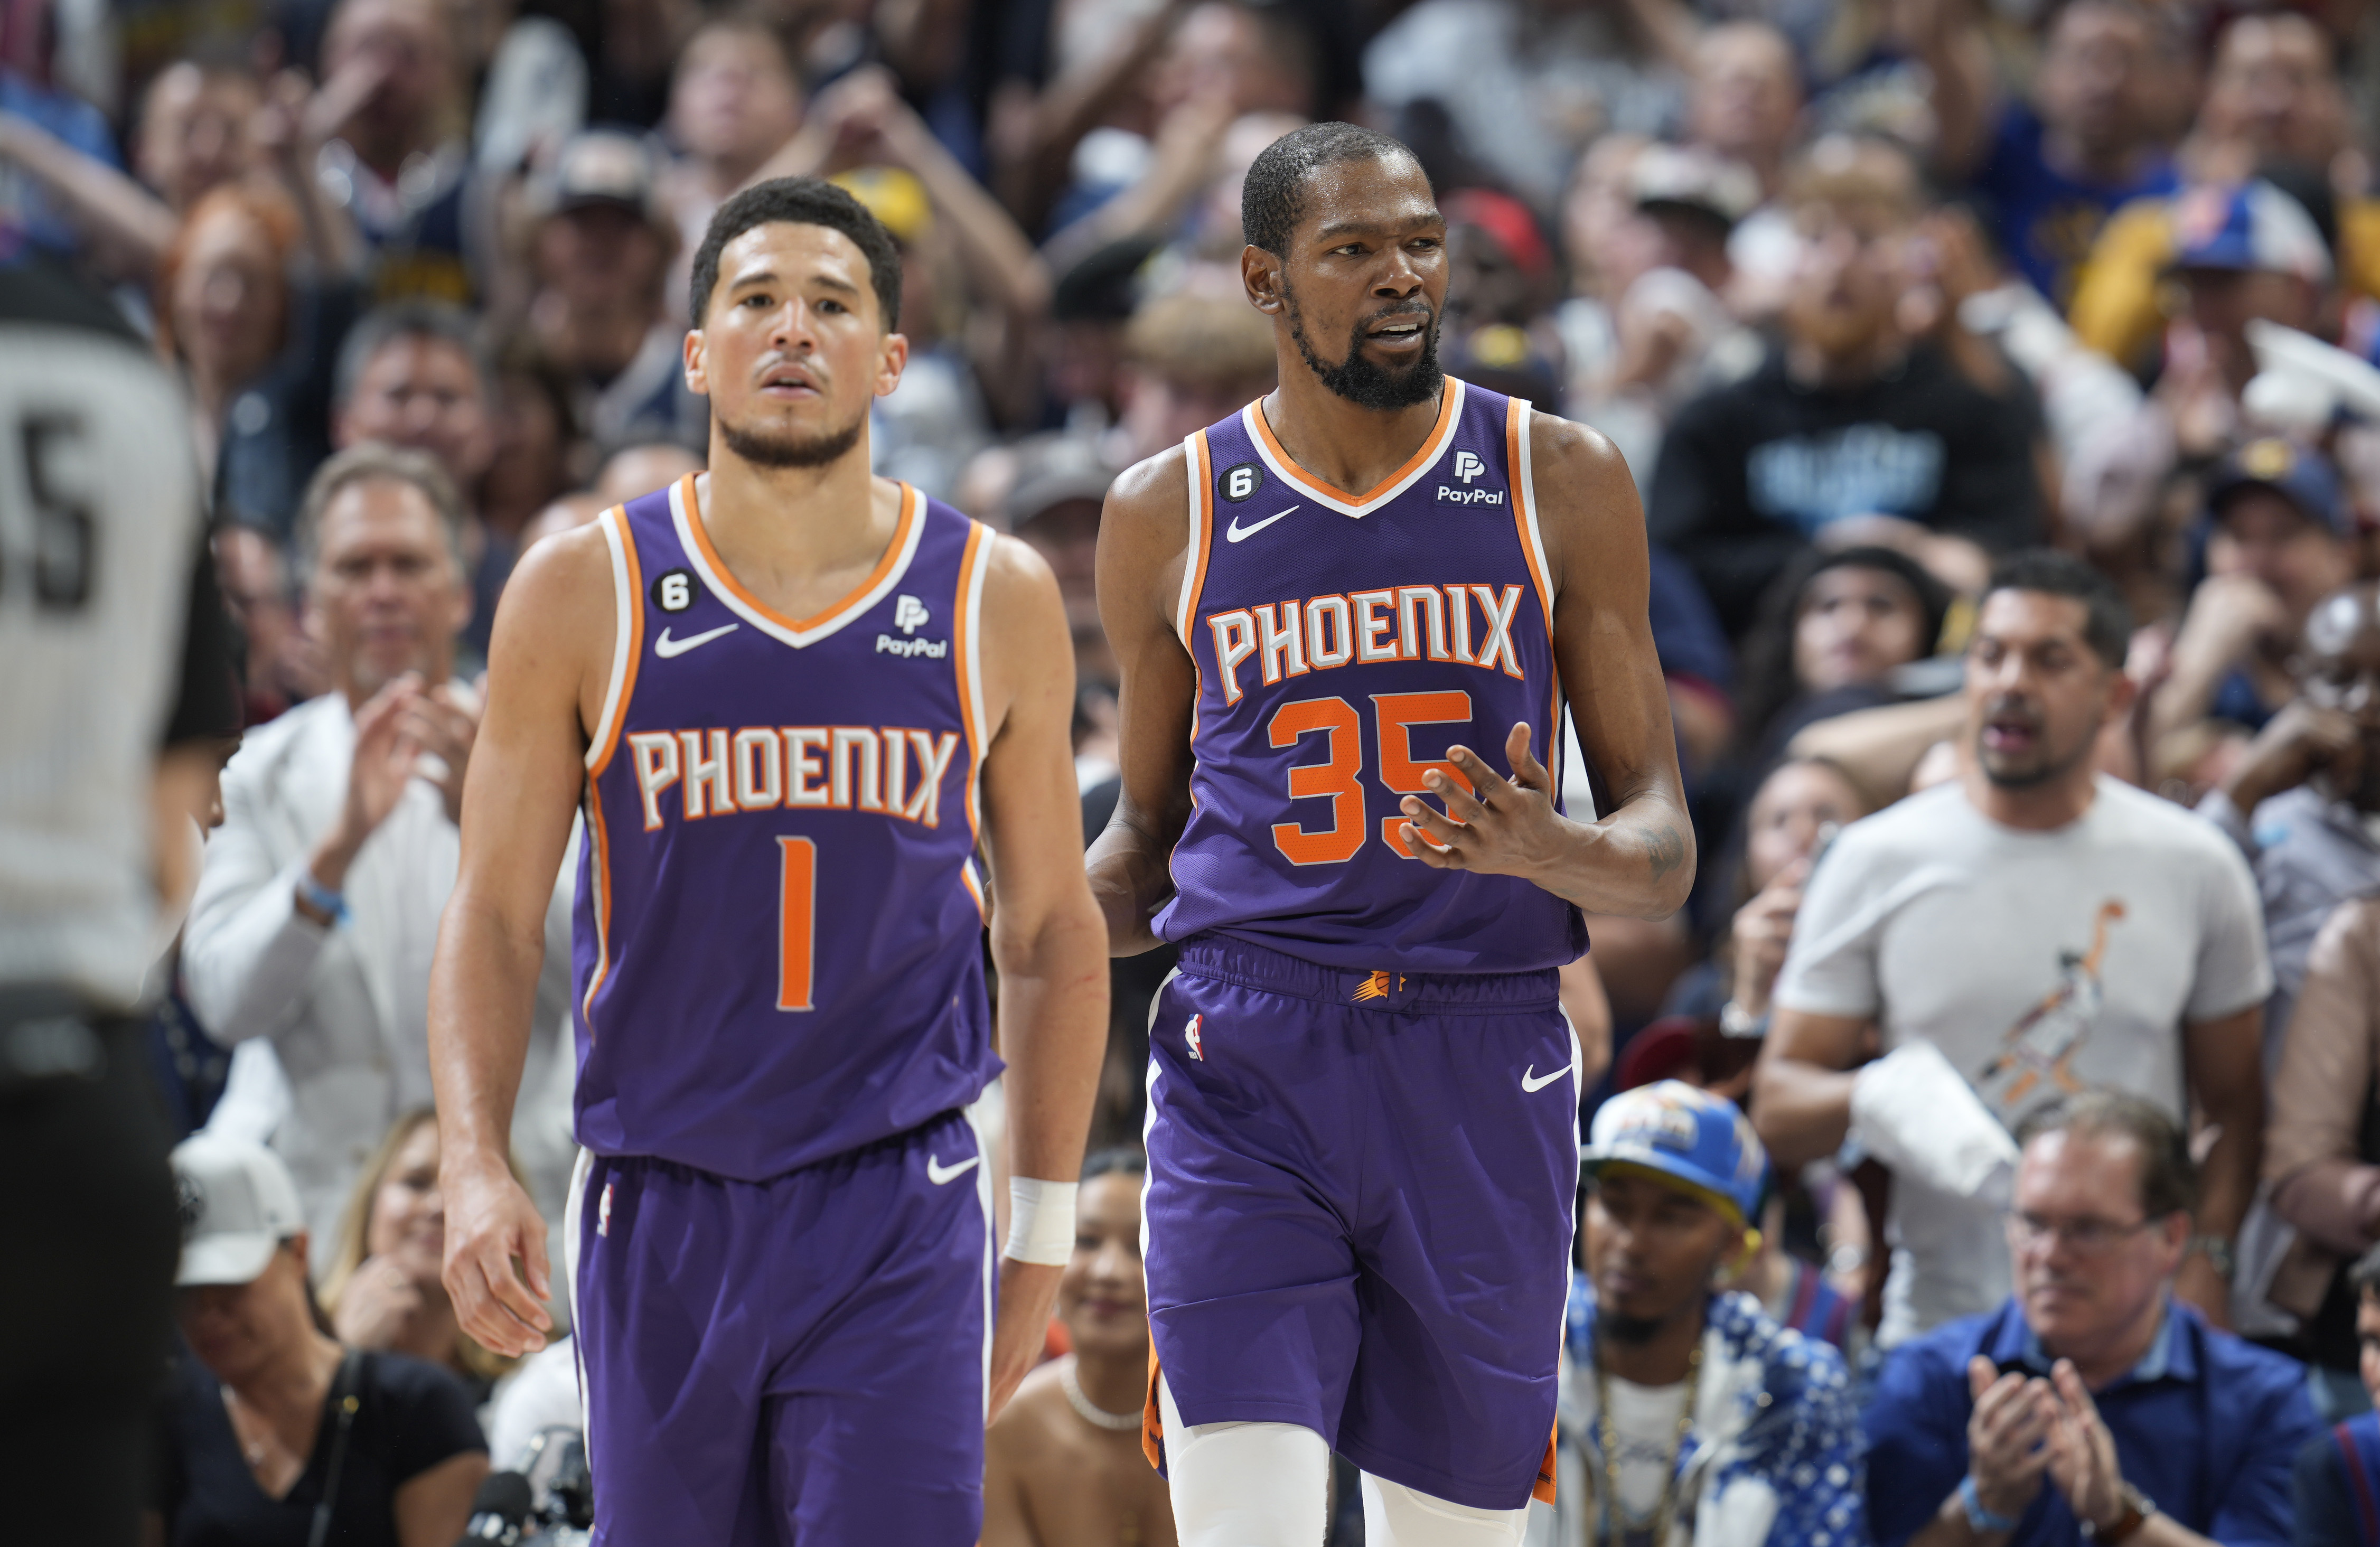 How to watch the Phoenix Suns